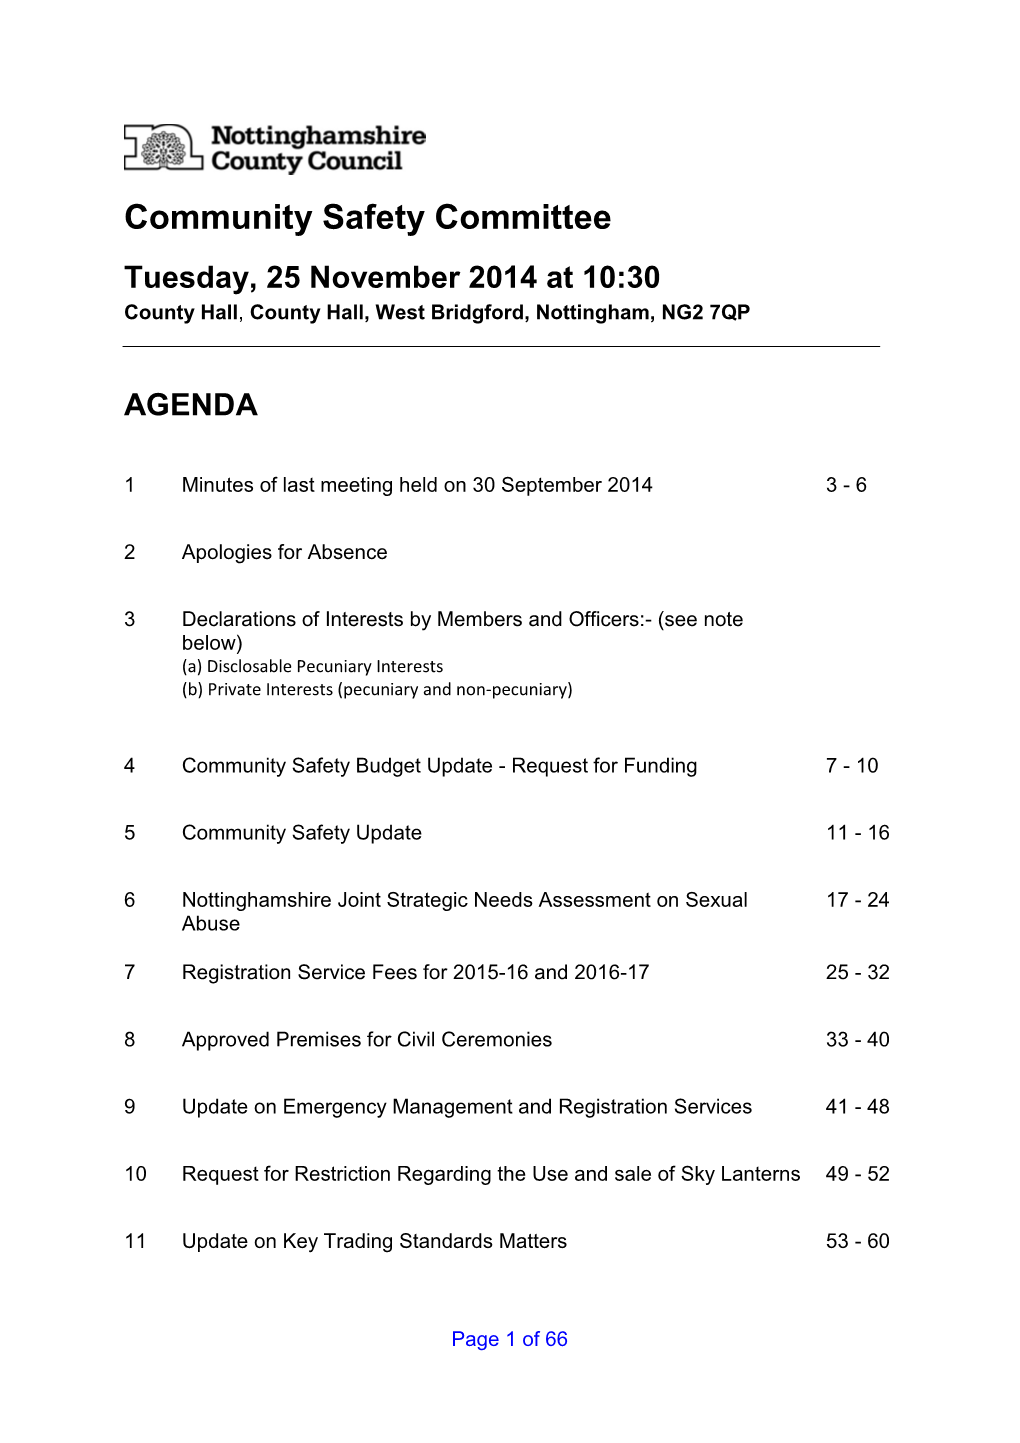 Community Safety Committee Tuesday, 25 November 2014 at 10:30 County Hall , County Hall, West Bridgford, Nottingham, NG2 7QP